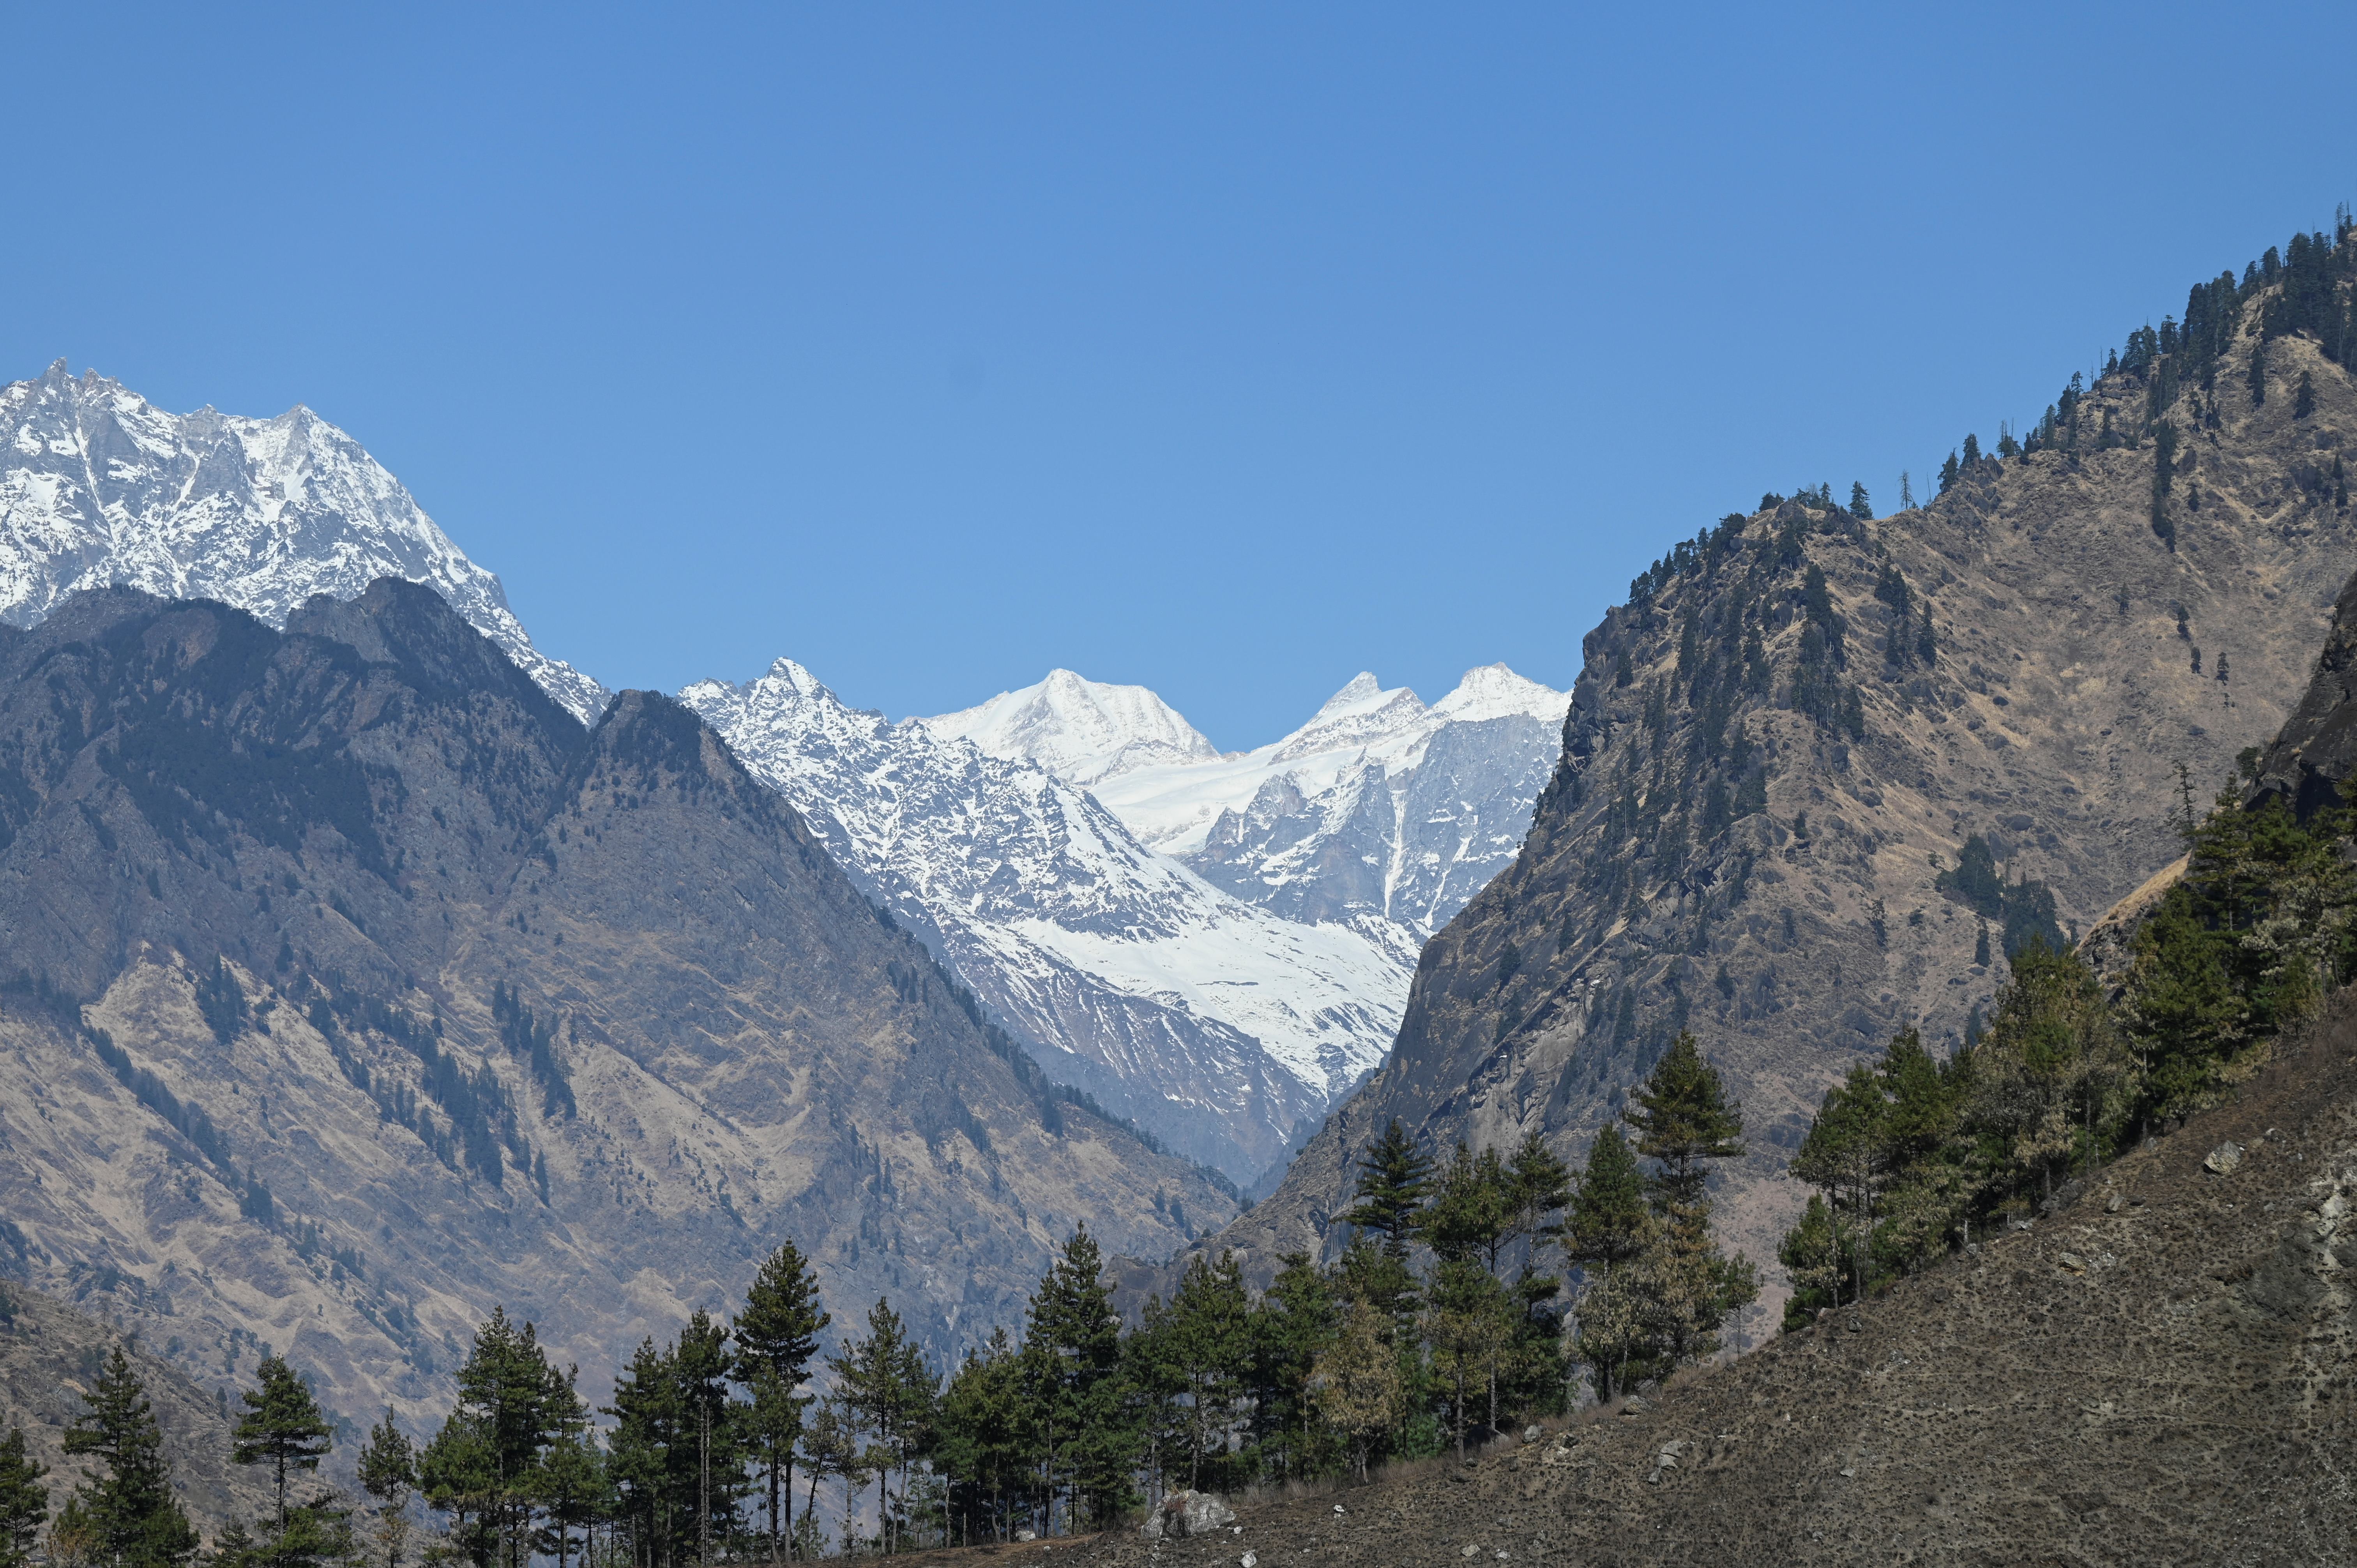 Representative: A snowcapped Himalayan mountain peak seen in Uttarakhand in this picture taken on 11 February 2021